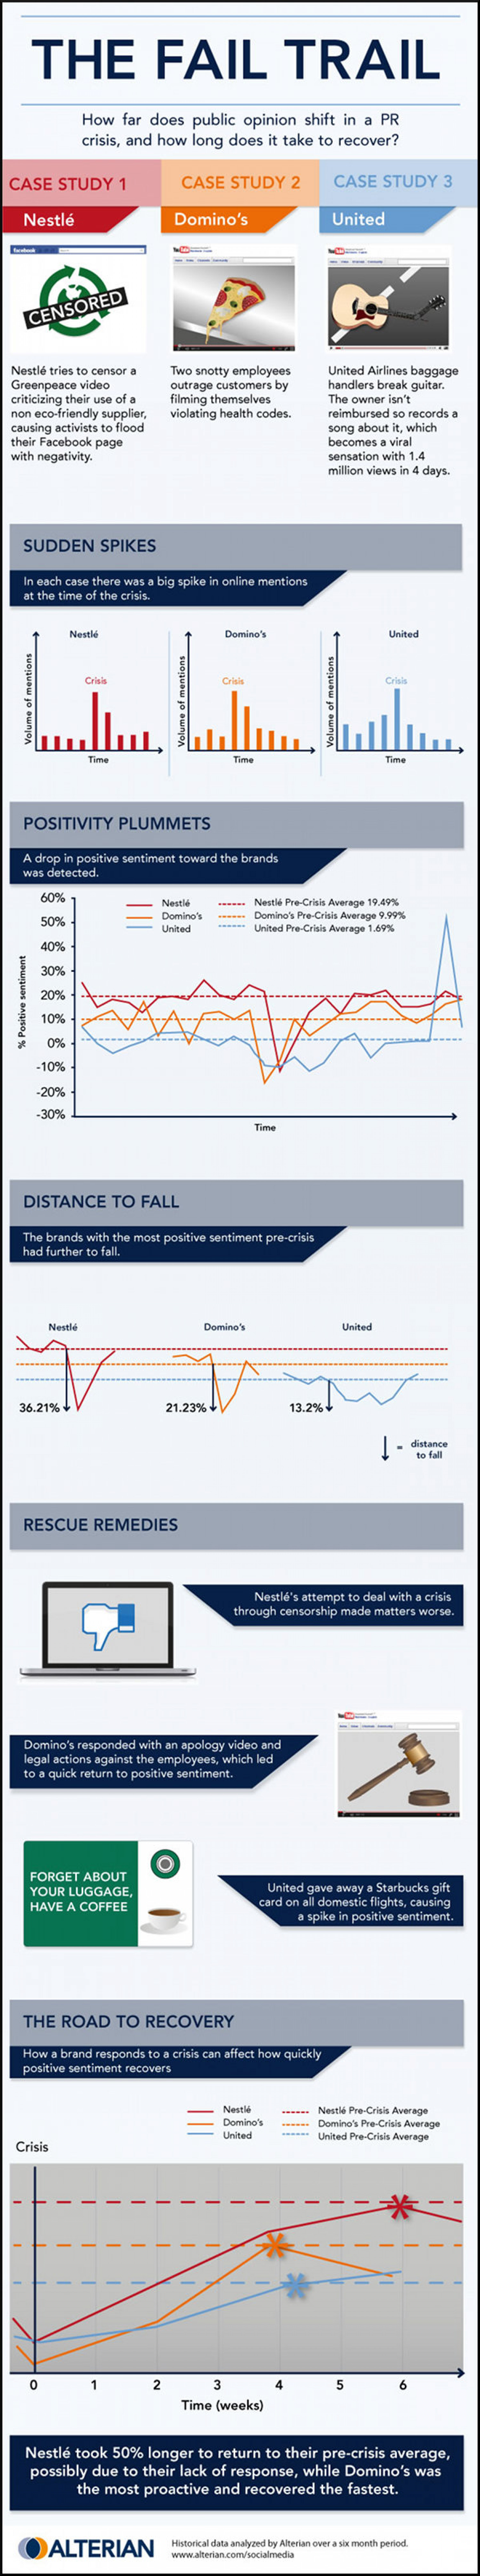 The Fail Trail: Analyzing the impact of a PR Crisis Infographic